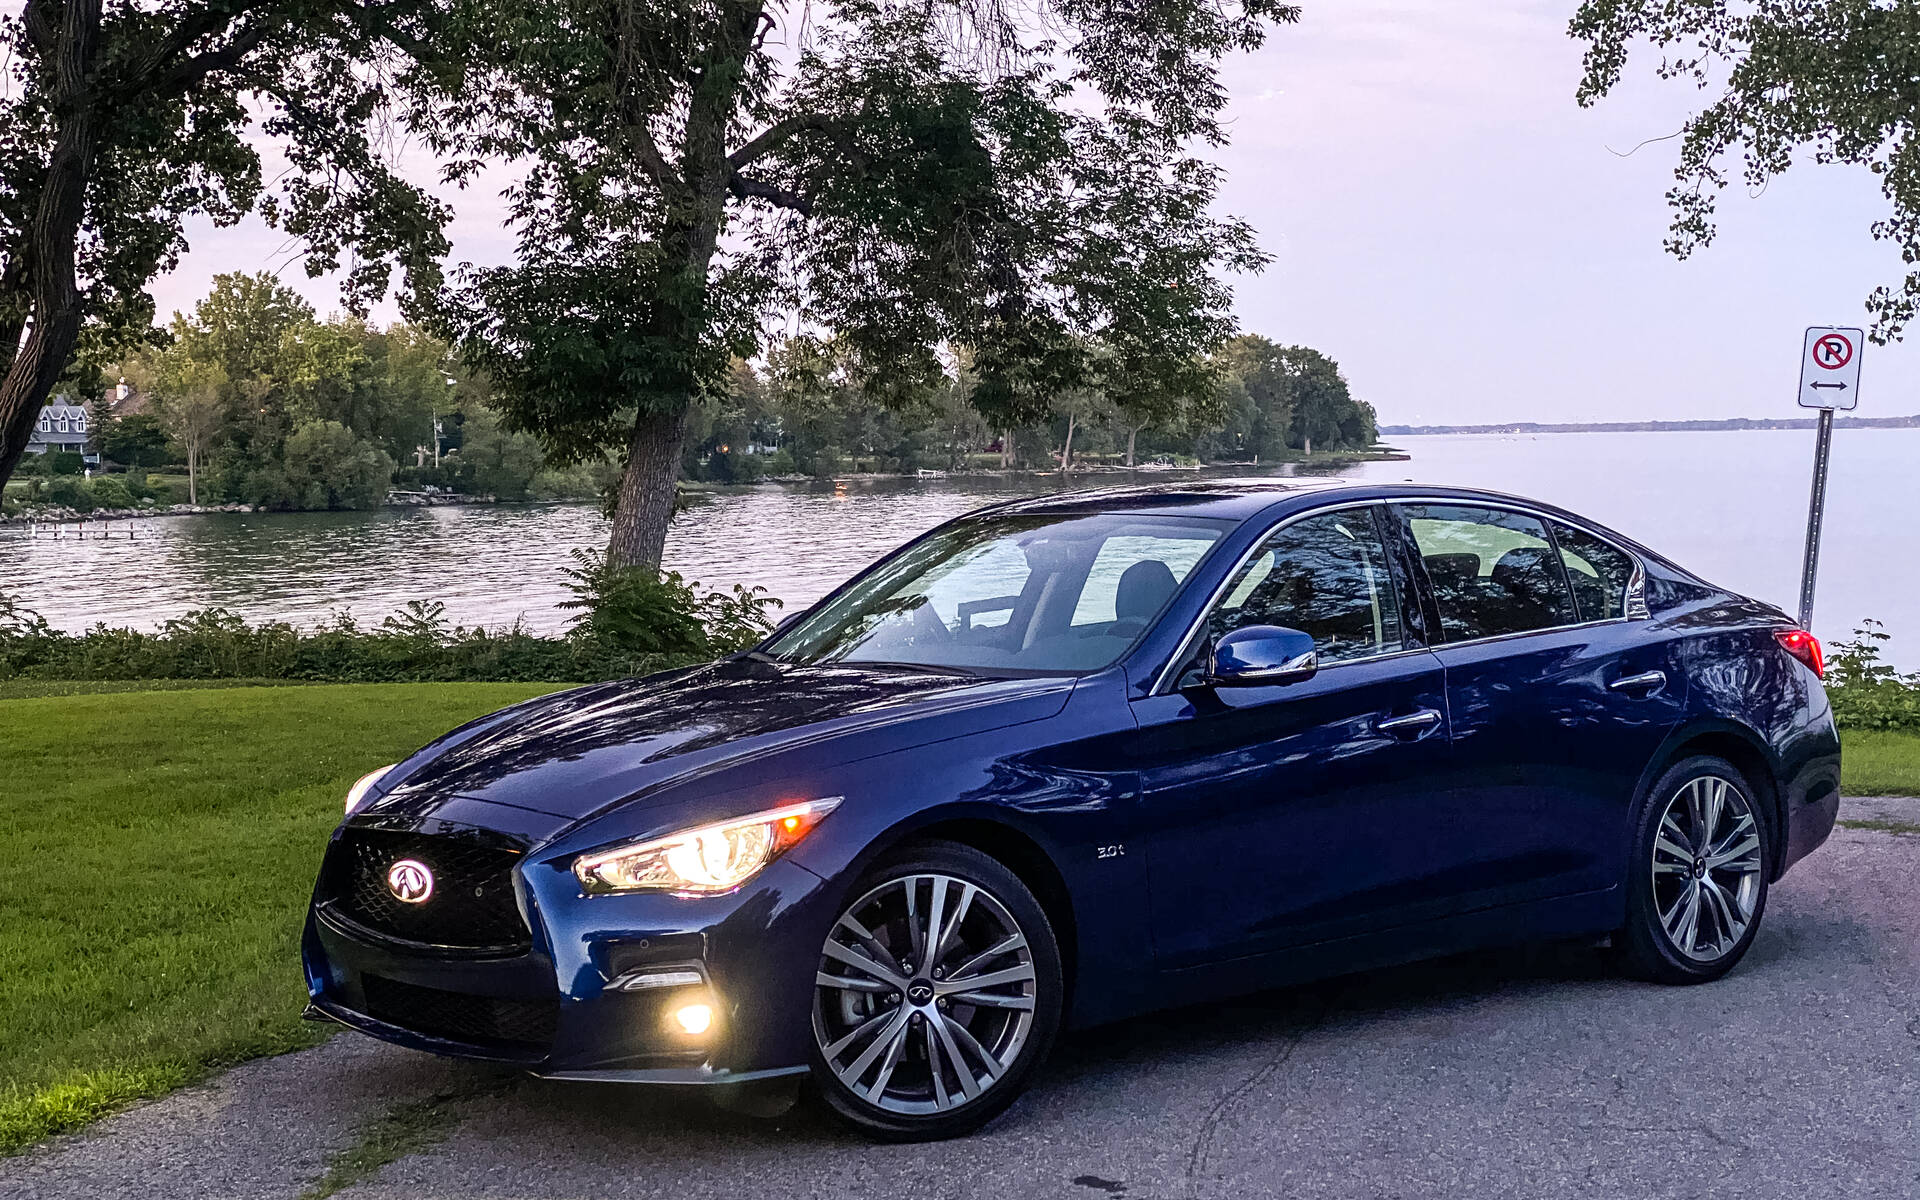 2020 Infiniti Q50: Here's the Problem With This Car - The Car Guide